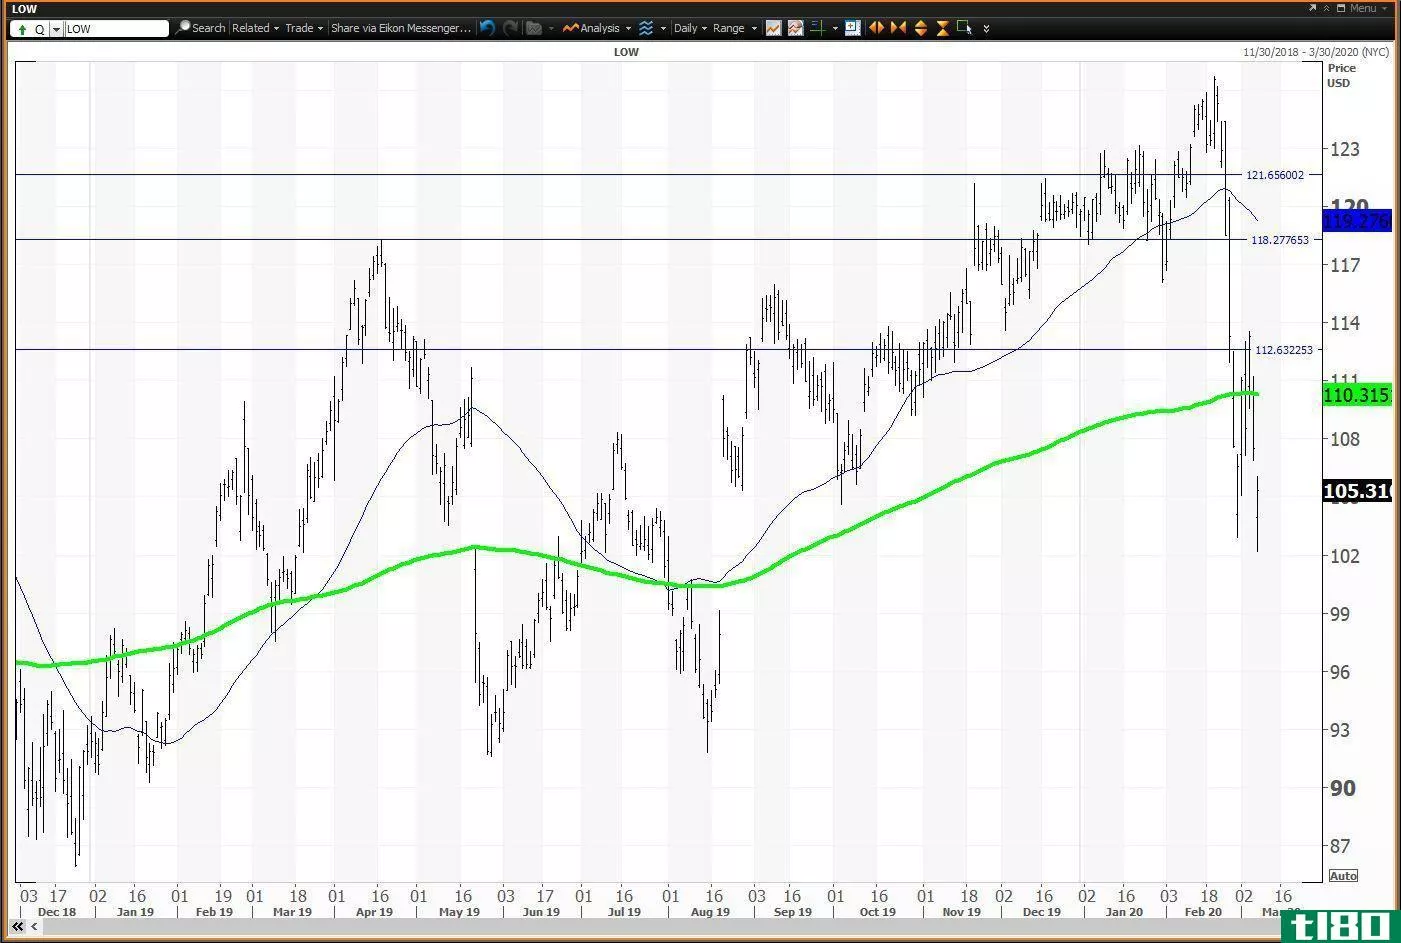 Daily chart showing the share price performance of Lowe's Companies, Inc. (LOW)